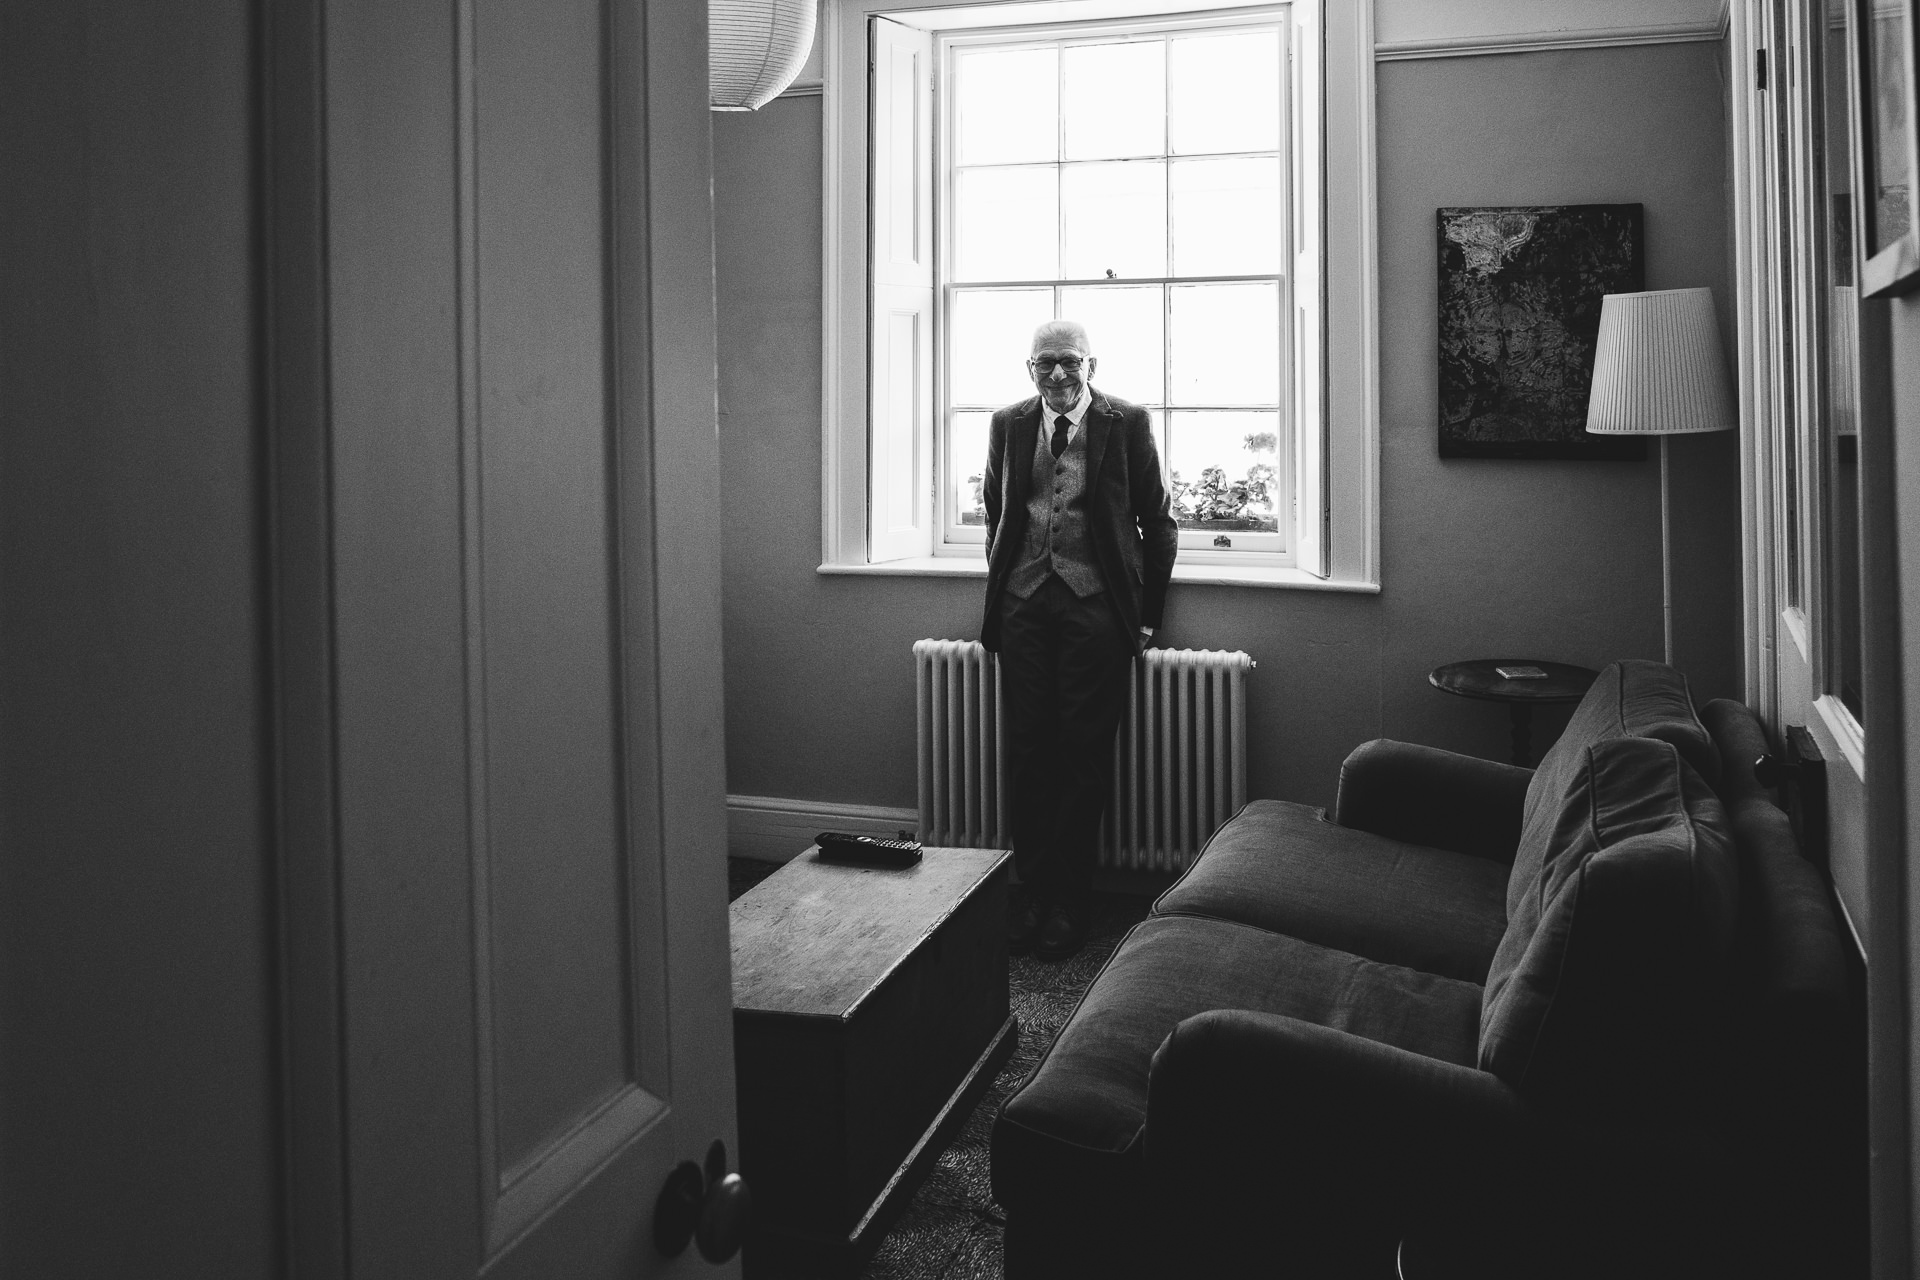 A man waiting alone in a room